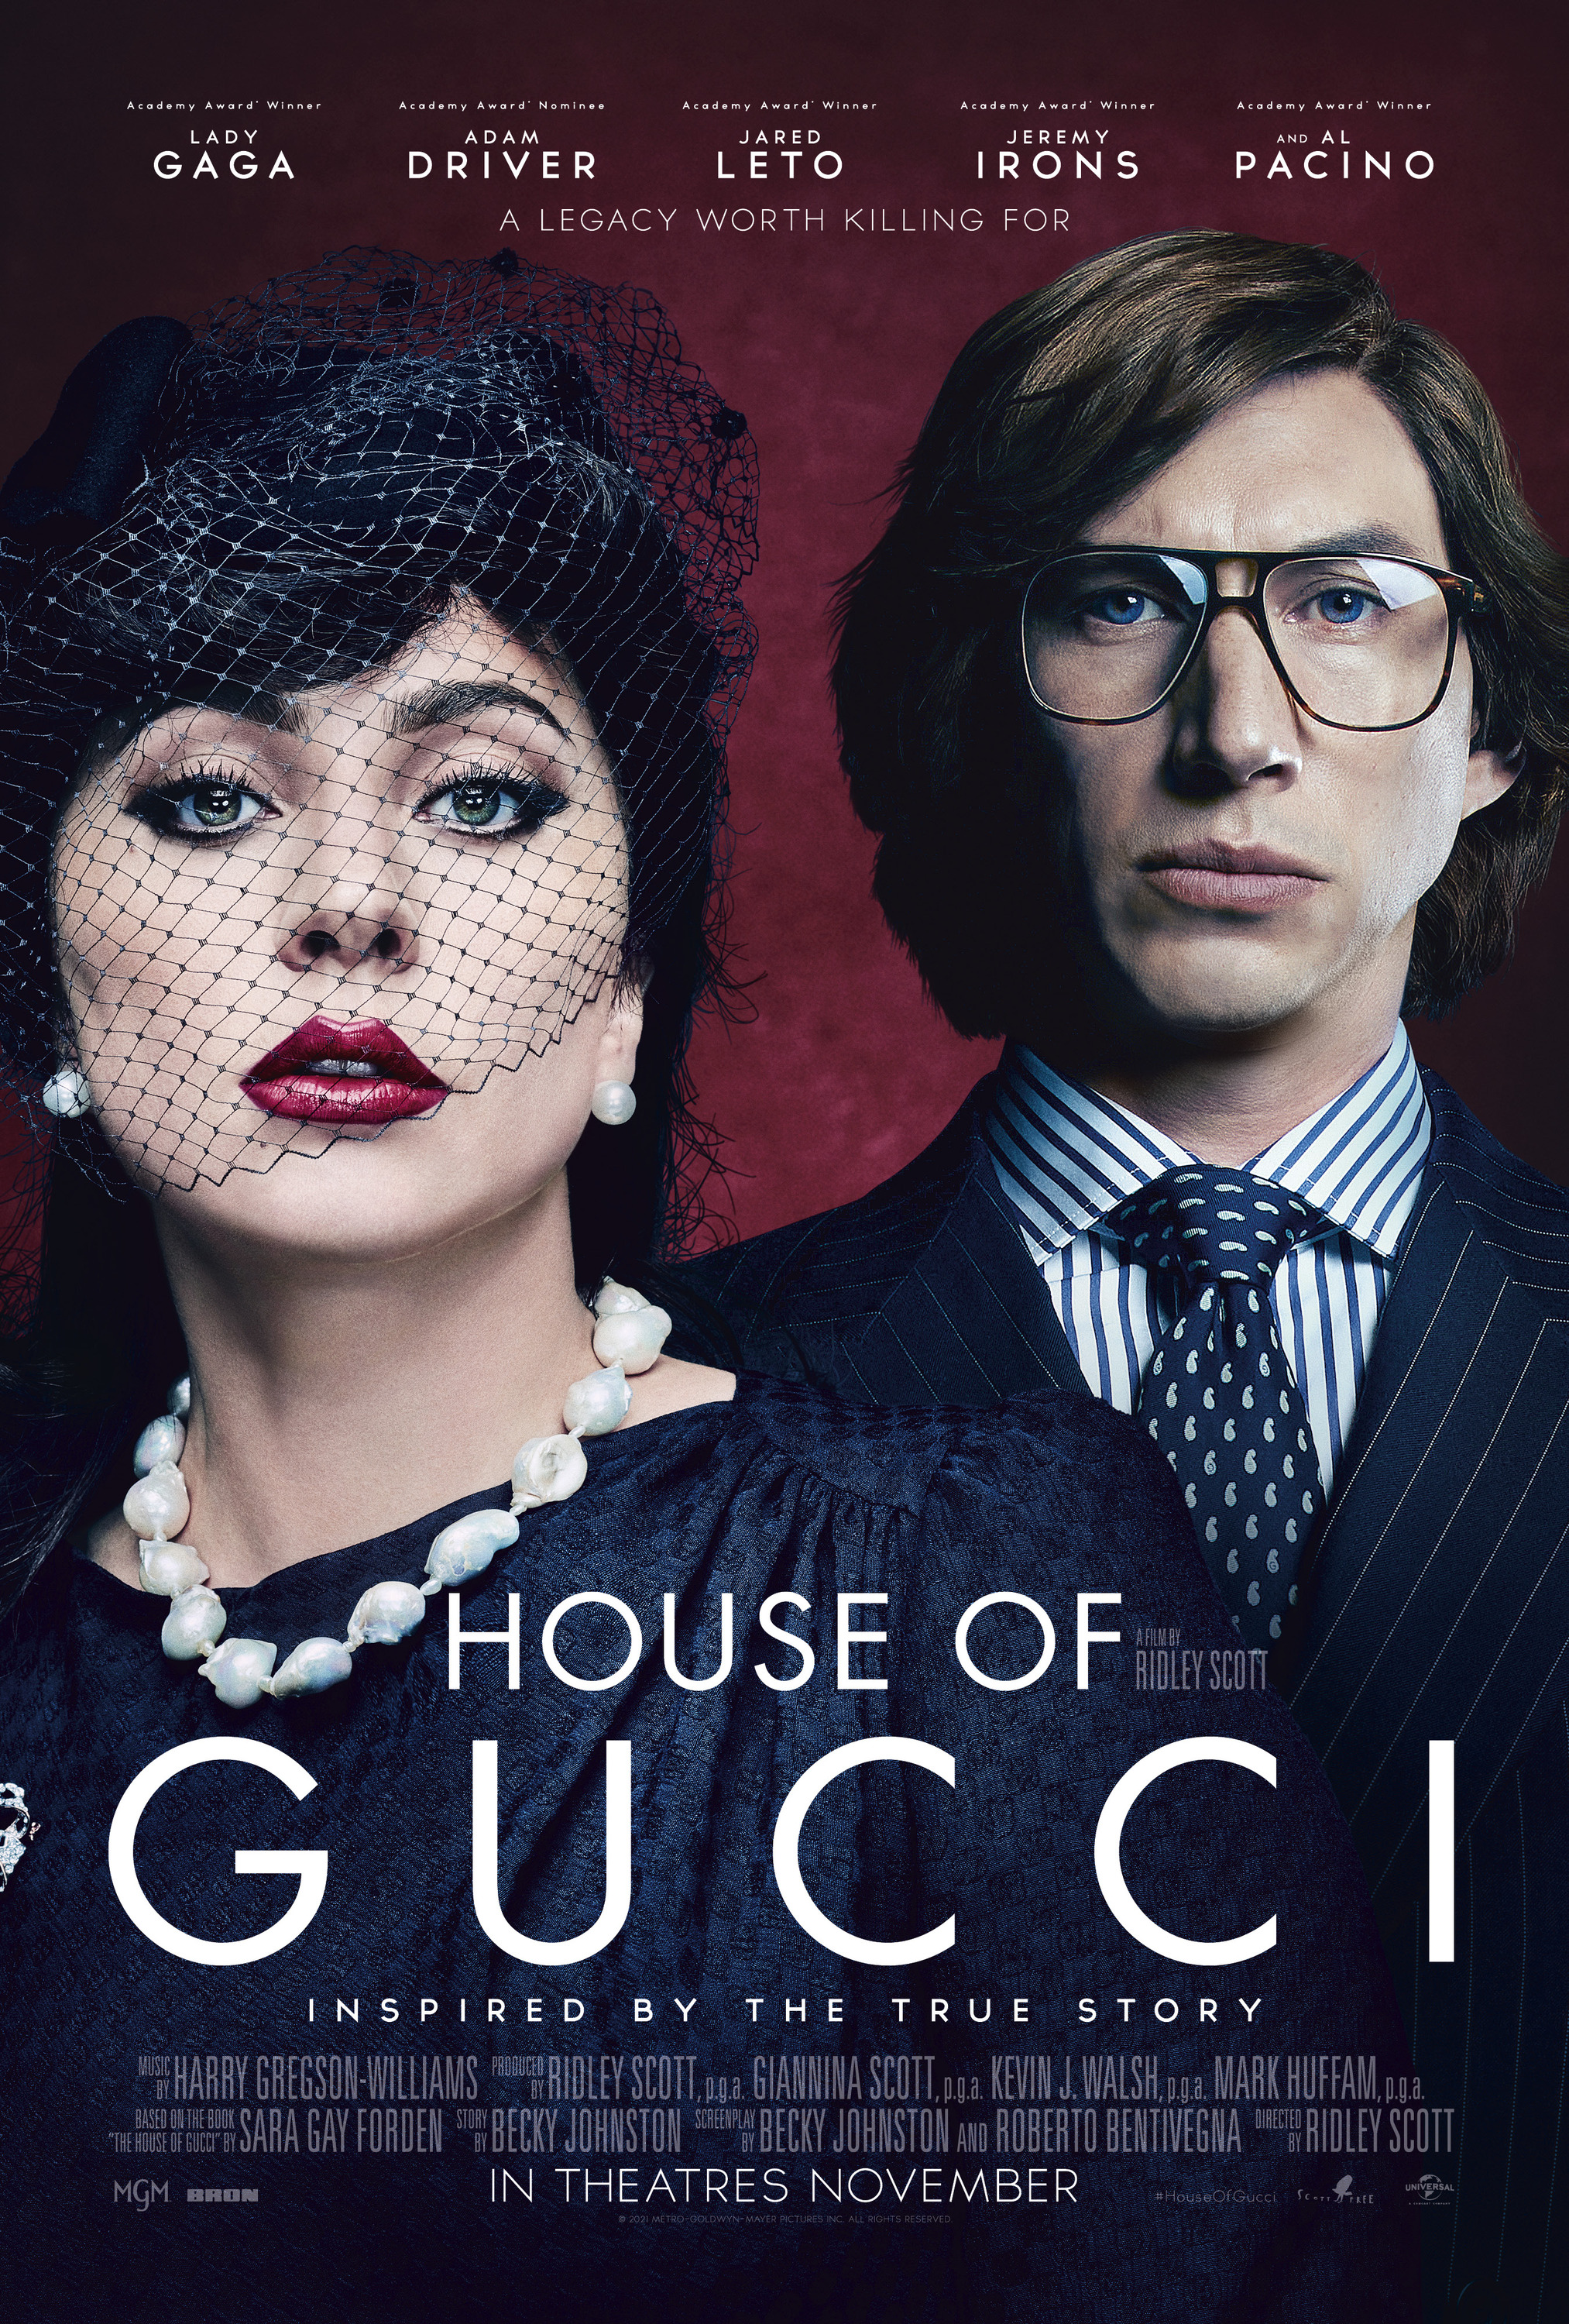 Mega Sized Movie Poster Image for House of Gucci (#13 of 15)